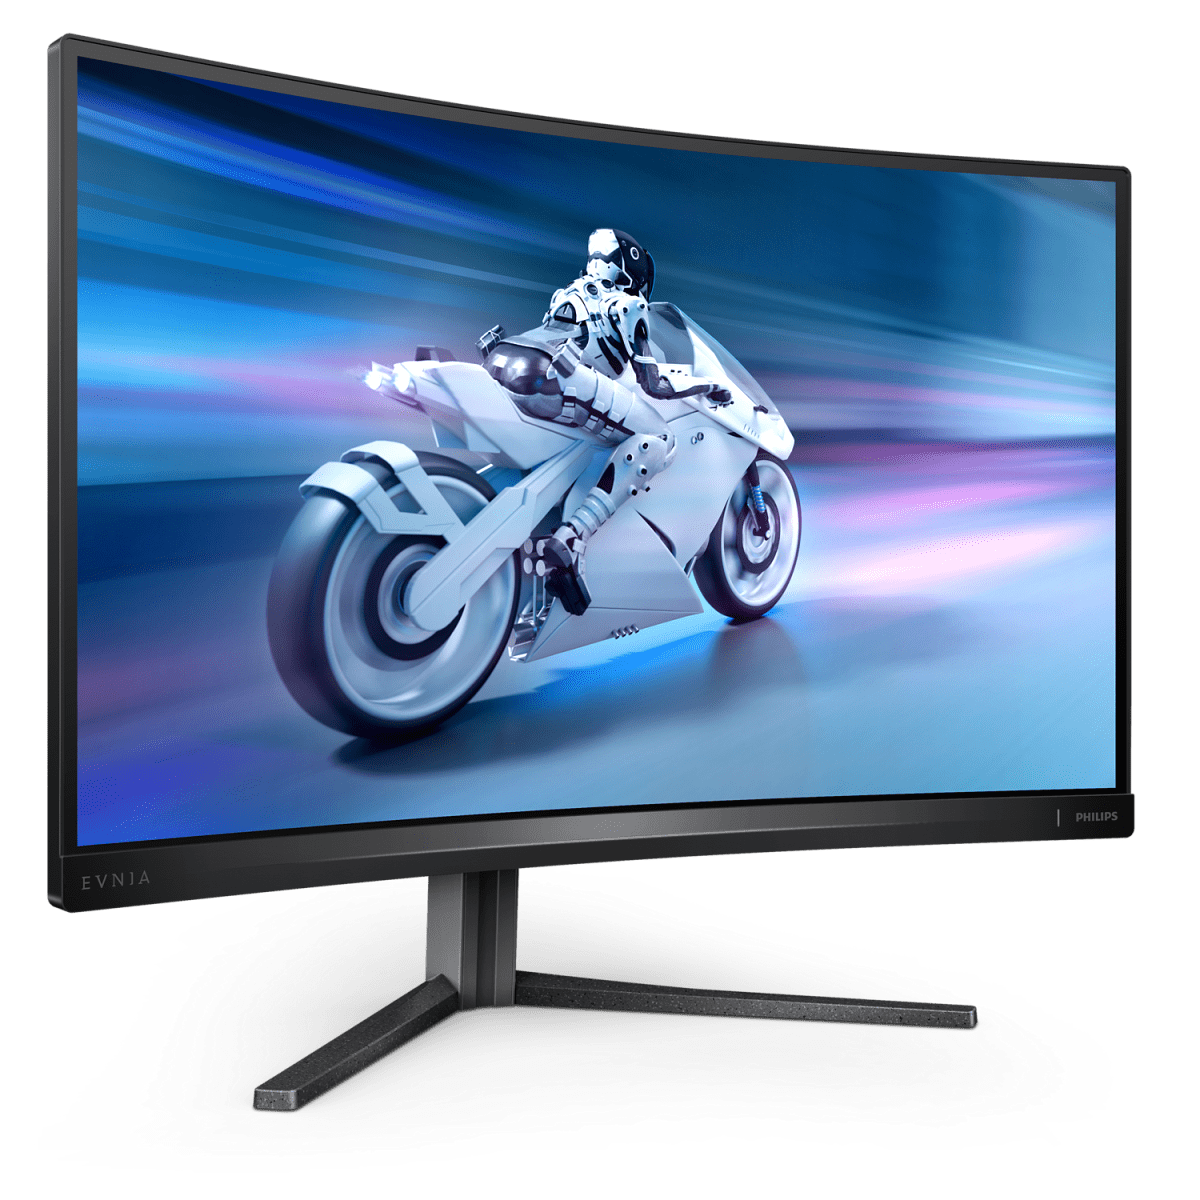 News from Philips with the new 240 Hz Evnia monitor